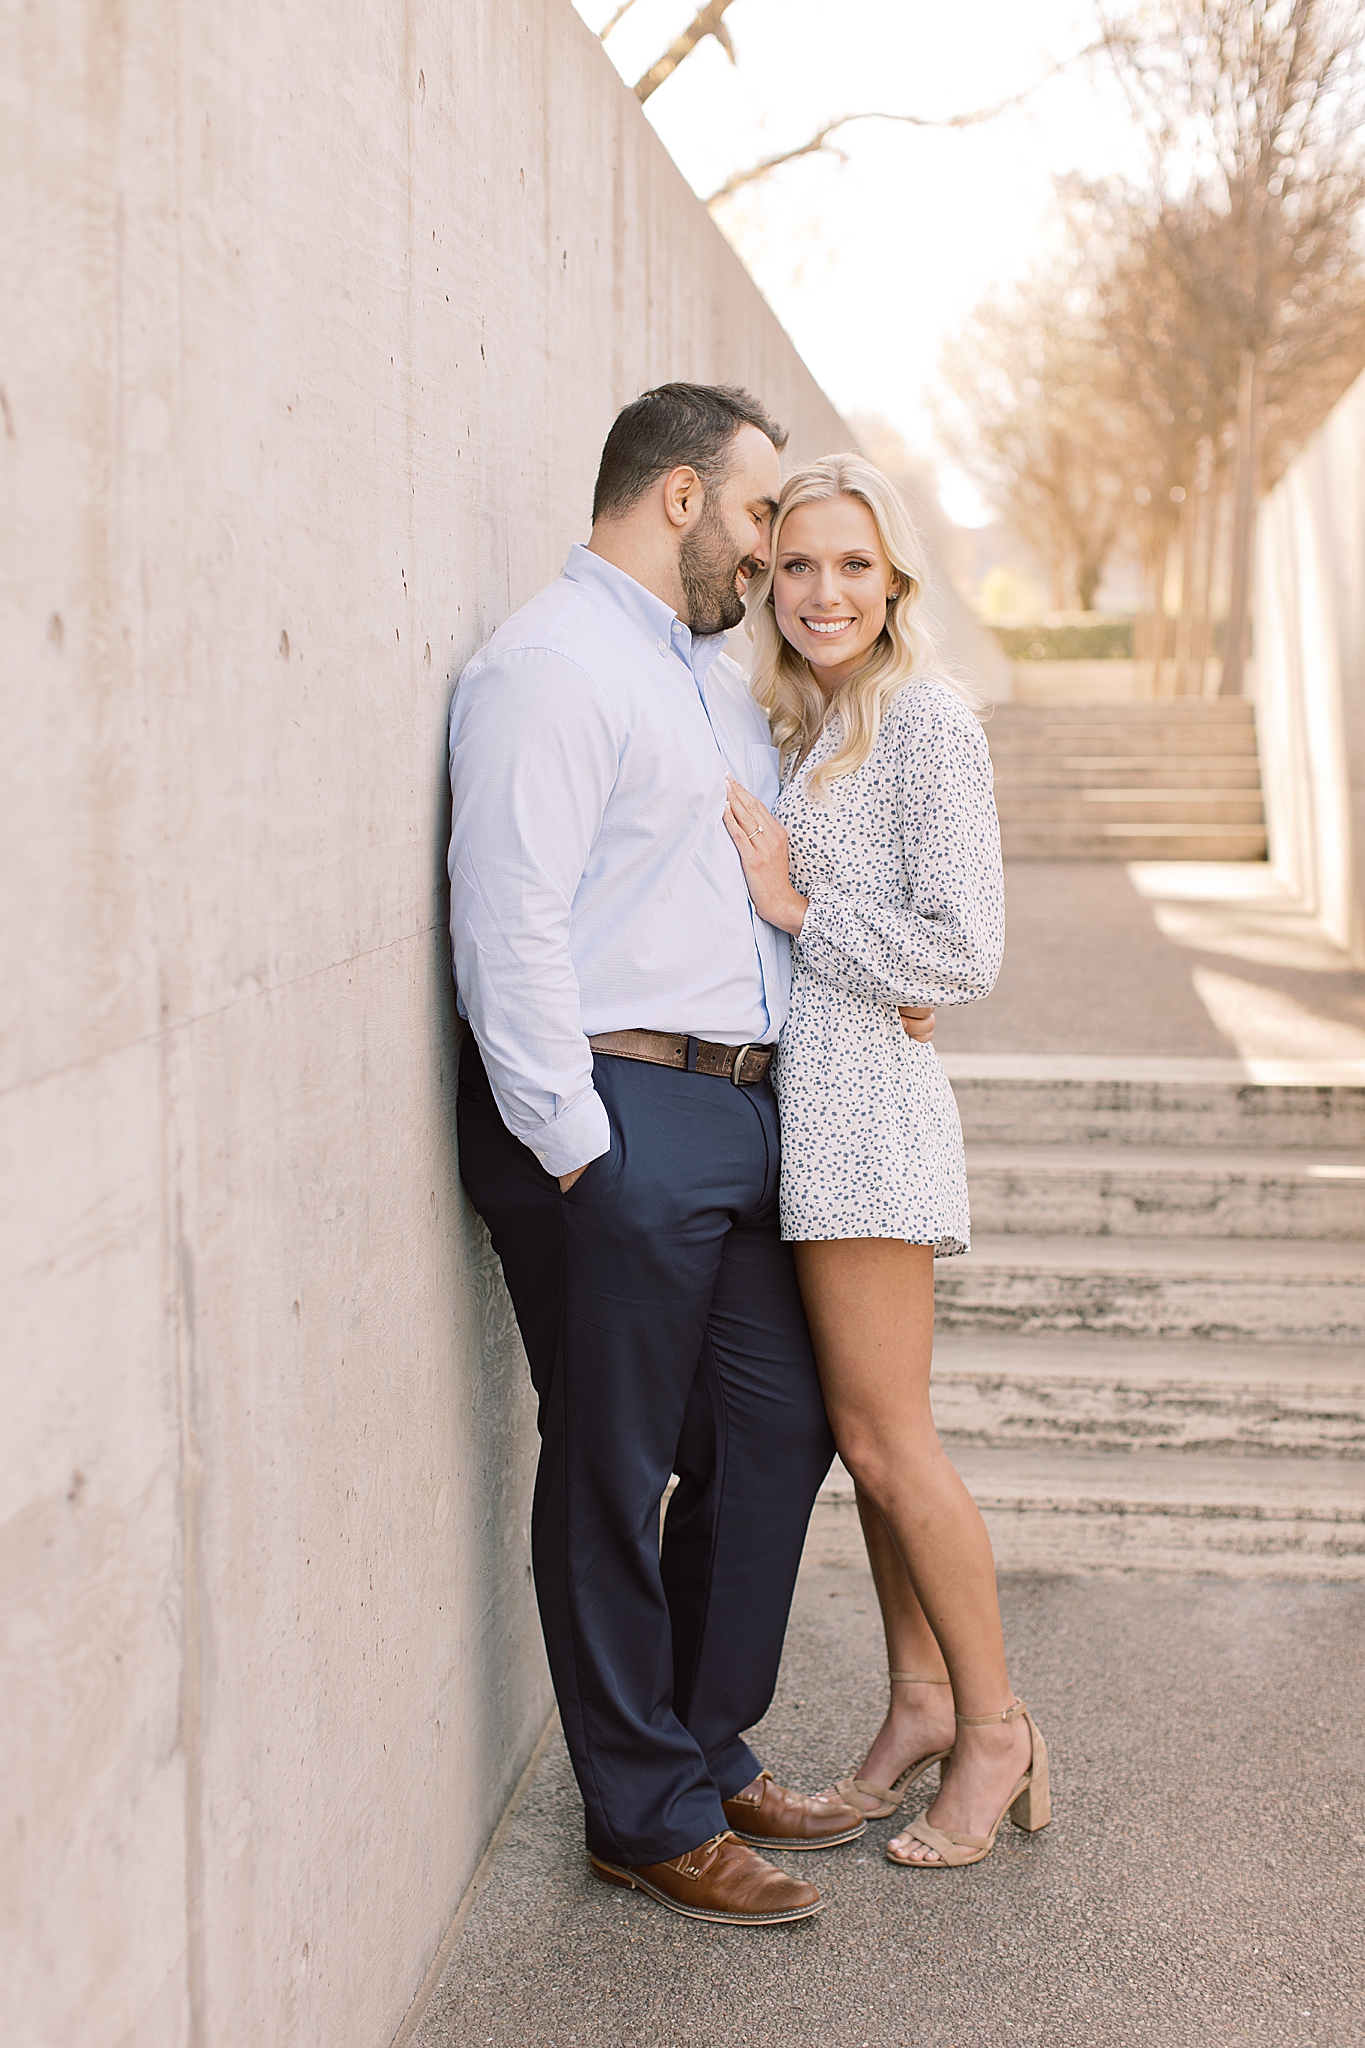 Kimball Art Museum engagement portraits of couple in light outfits